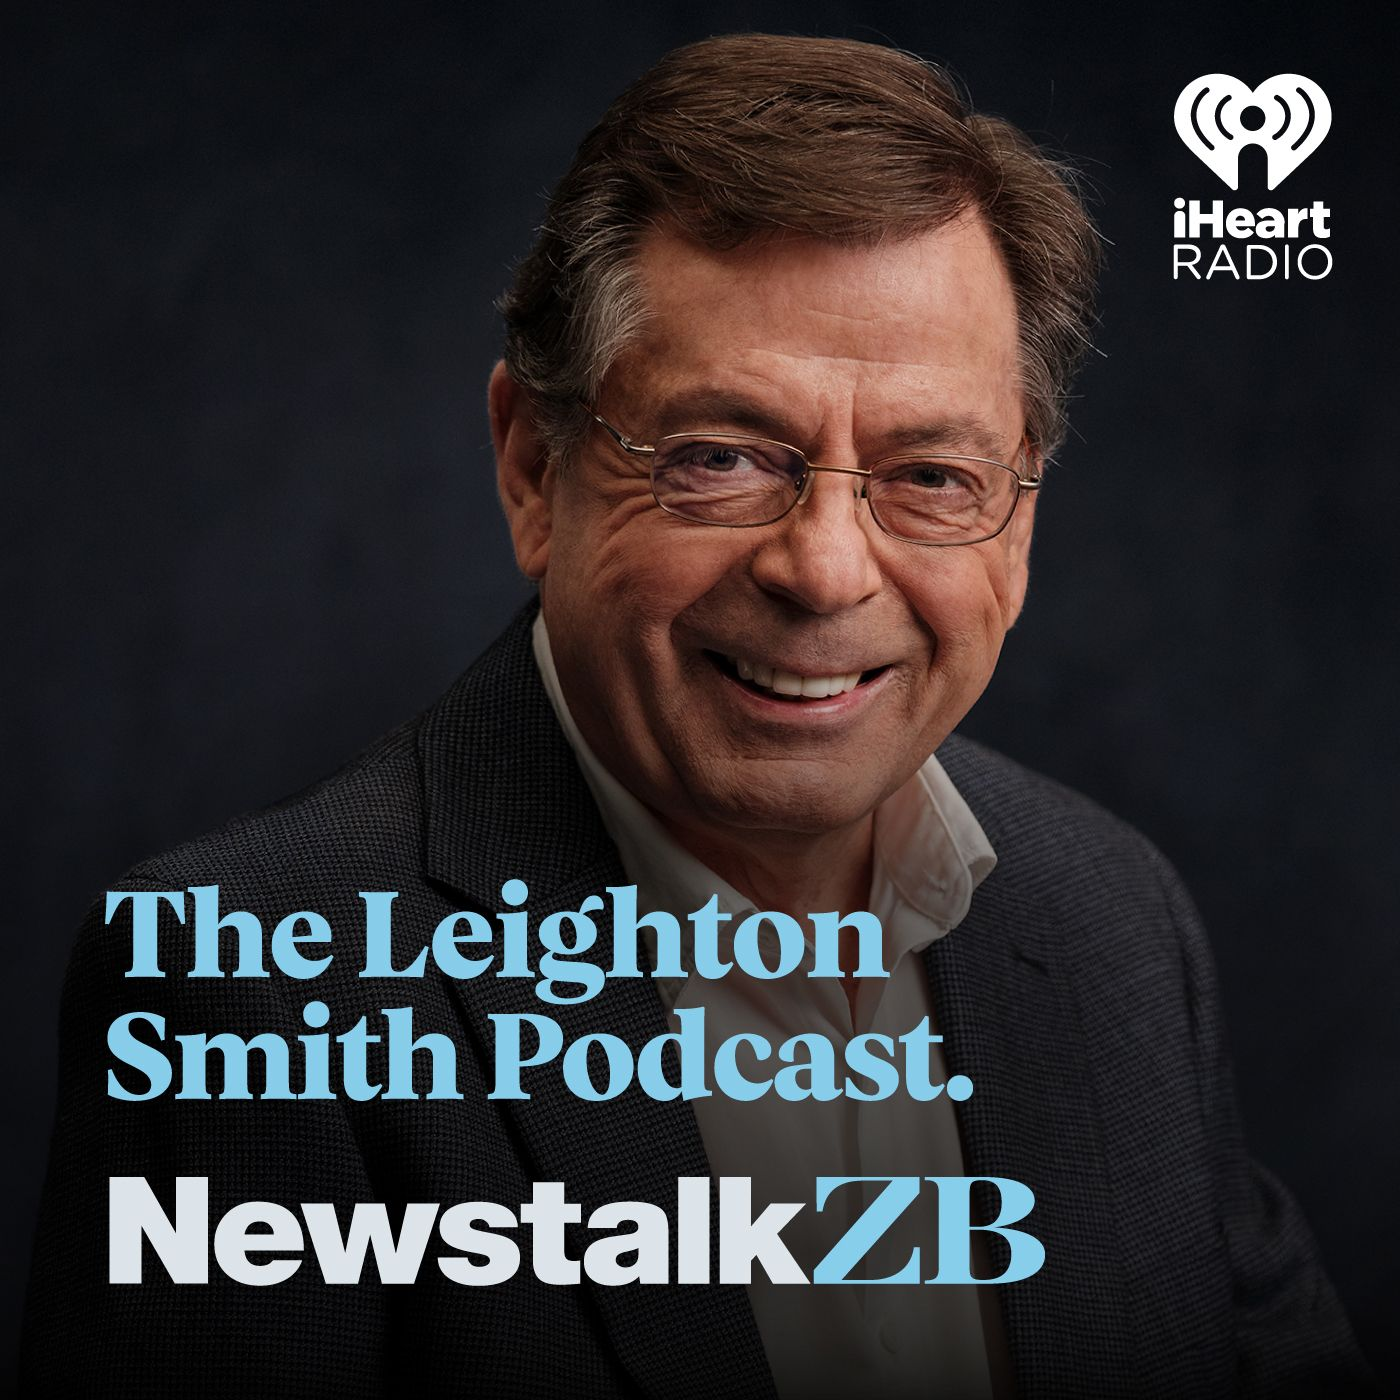 Leighton Smith Podcast Episode 164 - July 13th 2022